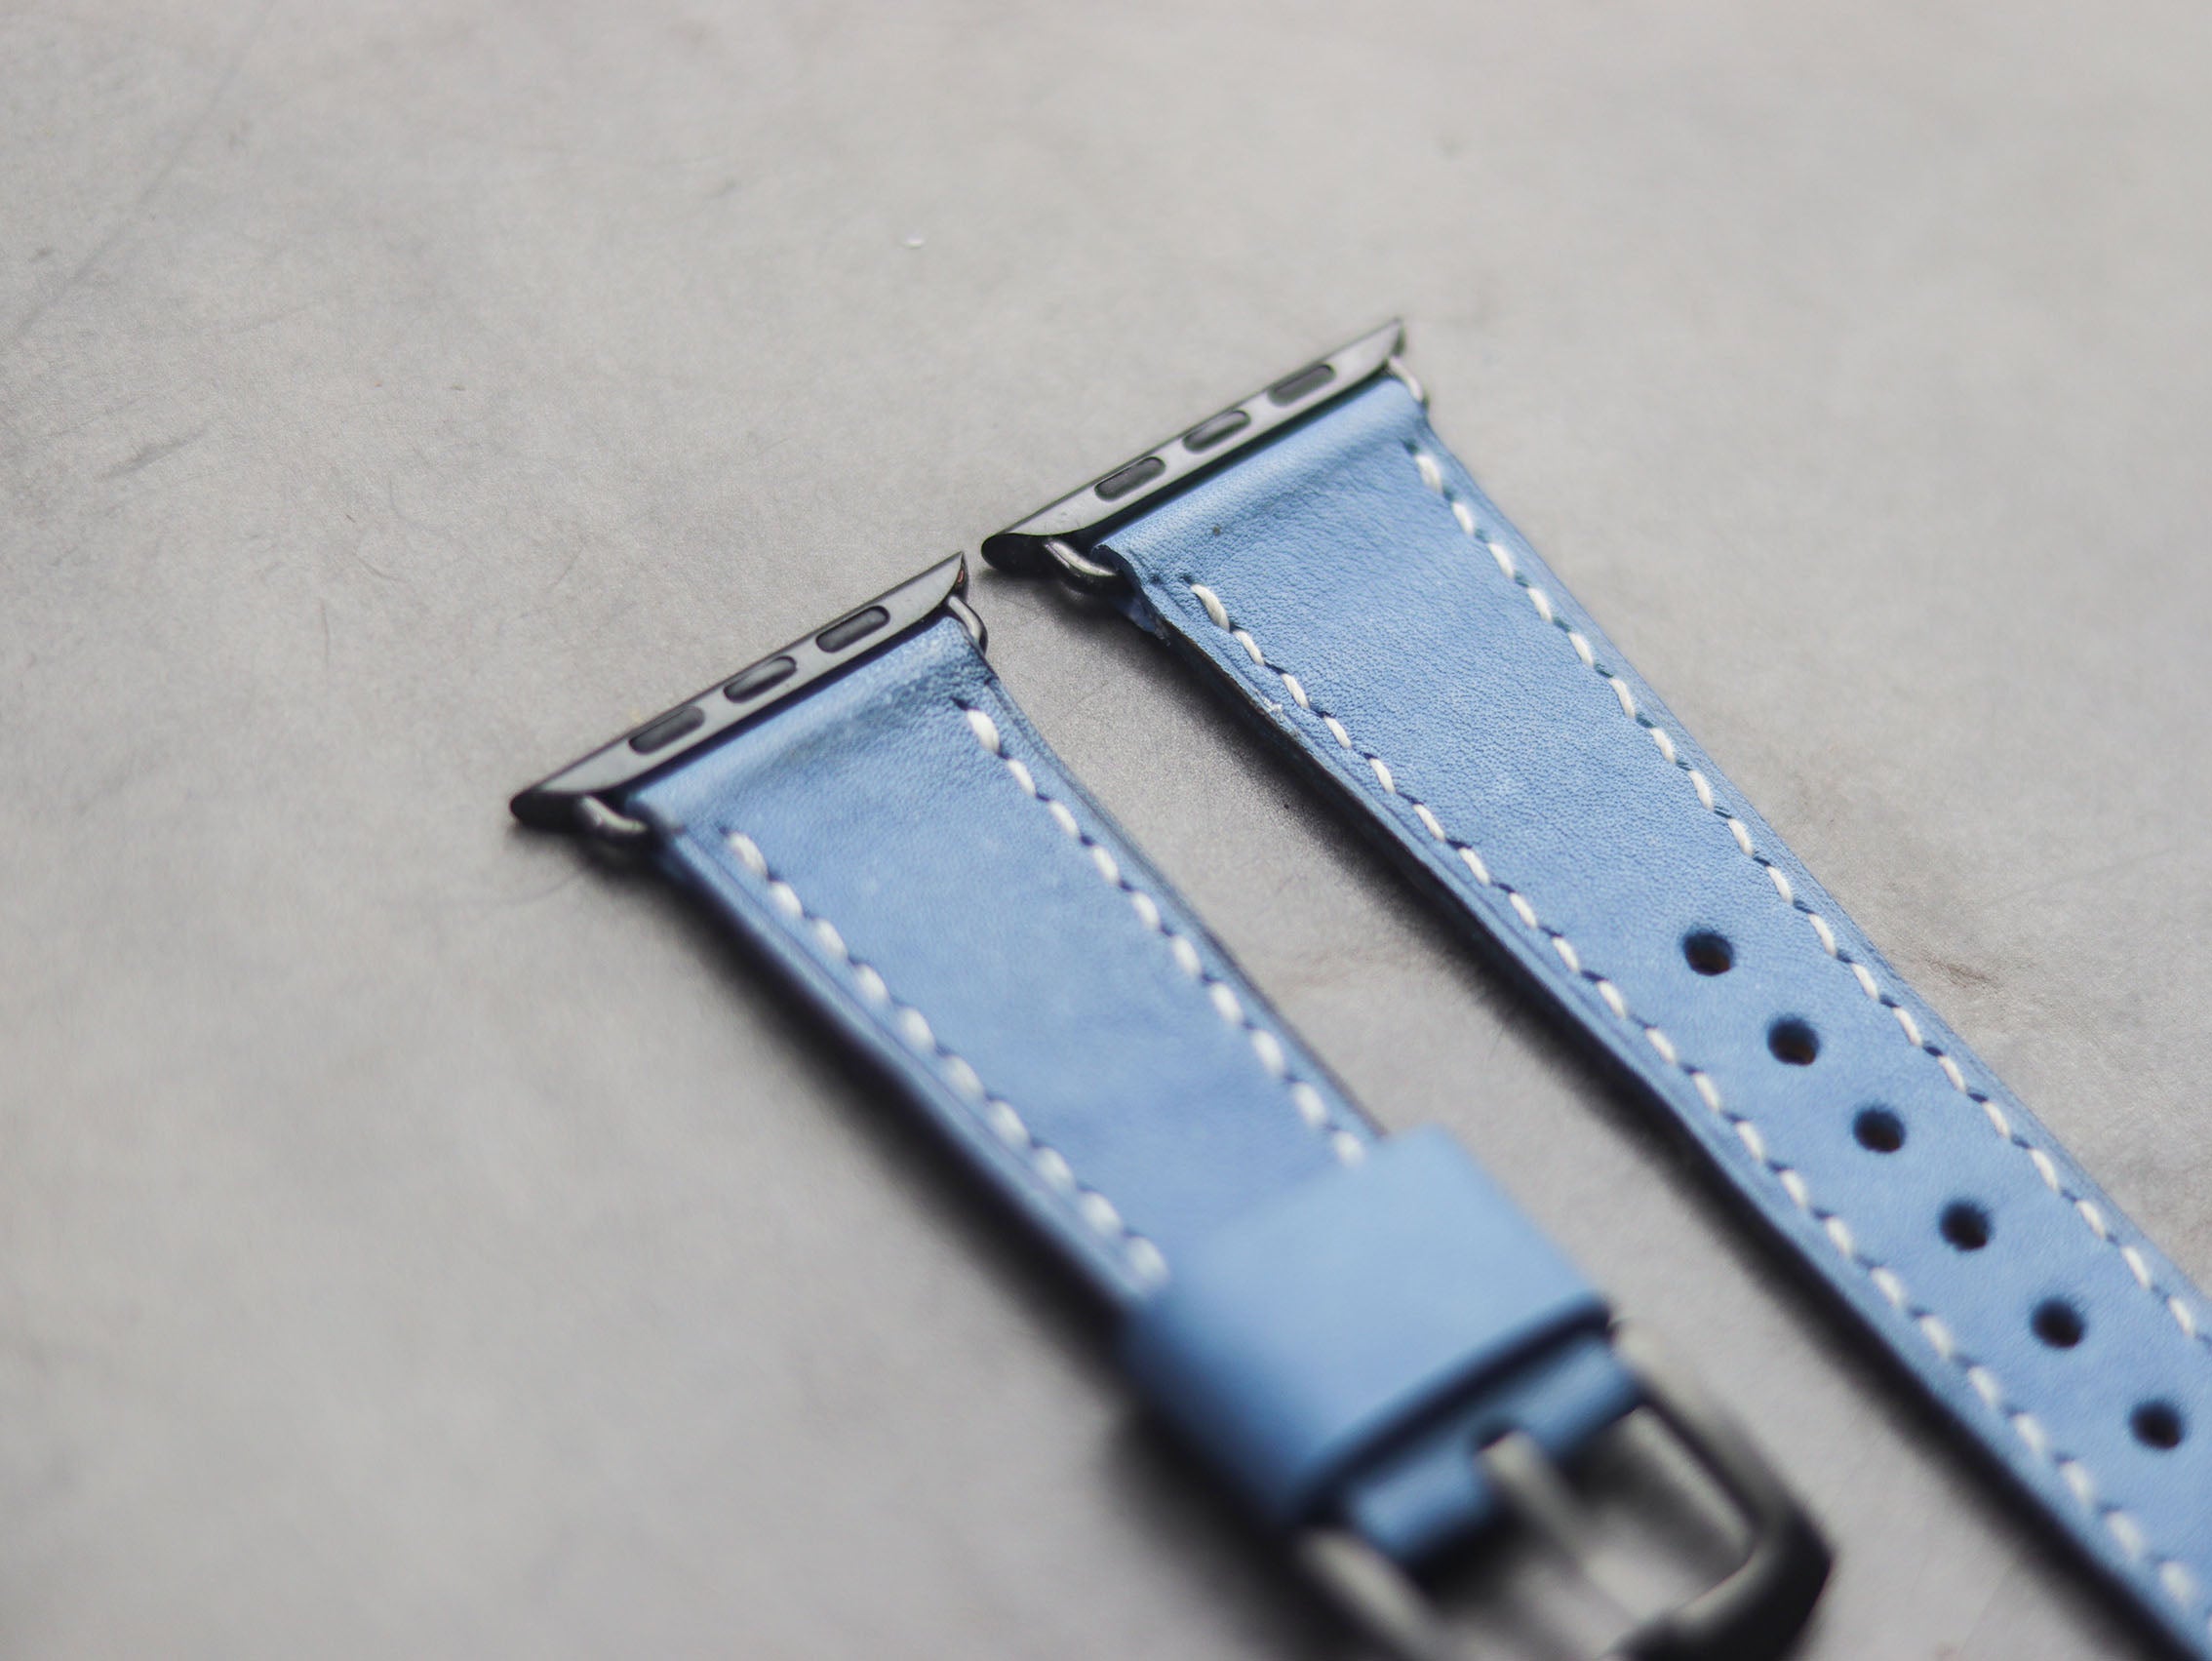 CAROLINE BLUE FULL STITCHED HAND-CRAFTED APPLE WATCH STRAPS